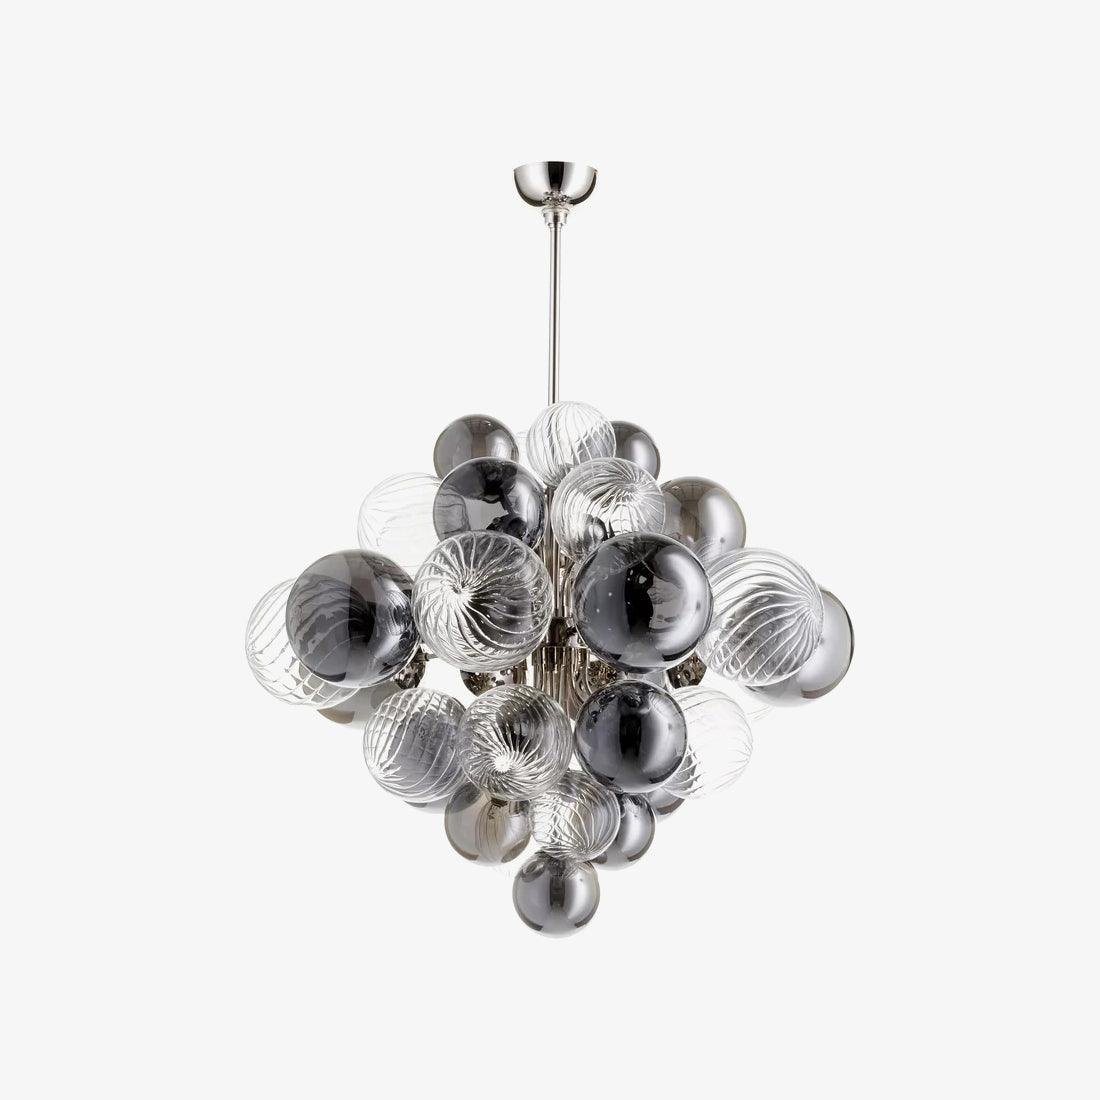 Chandelier with 18 Heads - Pallocino, Diameter 31.5 inches x Height 25.6 inches (80cm x 65cm), Chrome Finish